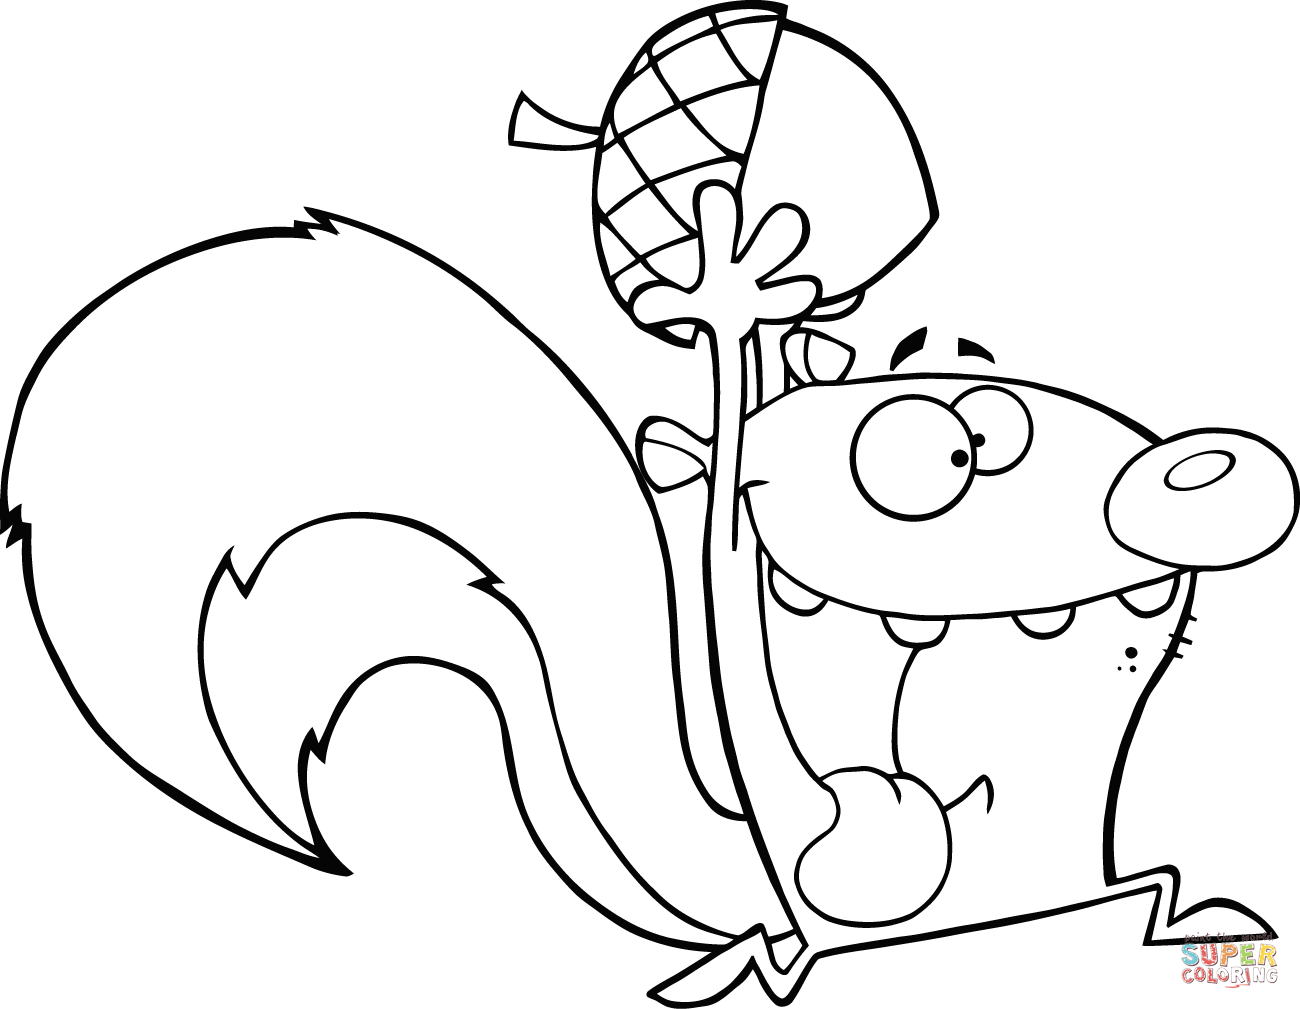 squirrel coloring pages free free printable squirrel coloring pages for kids animal place squirrel free pages coloring 